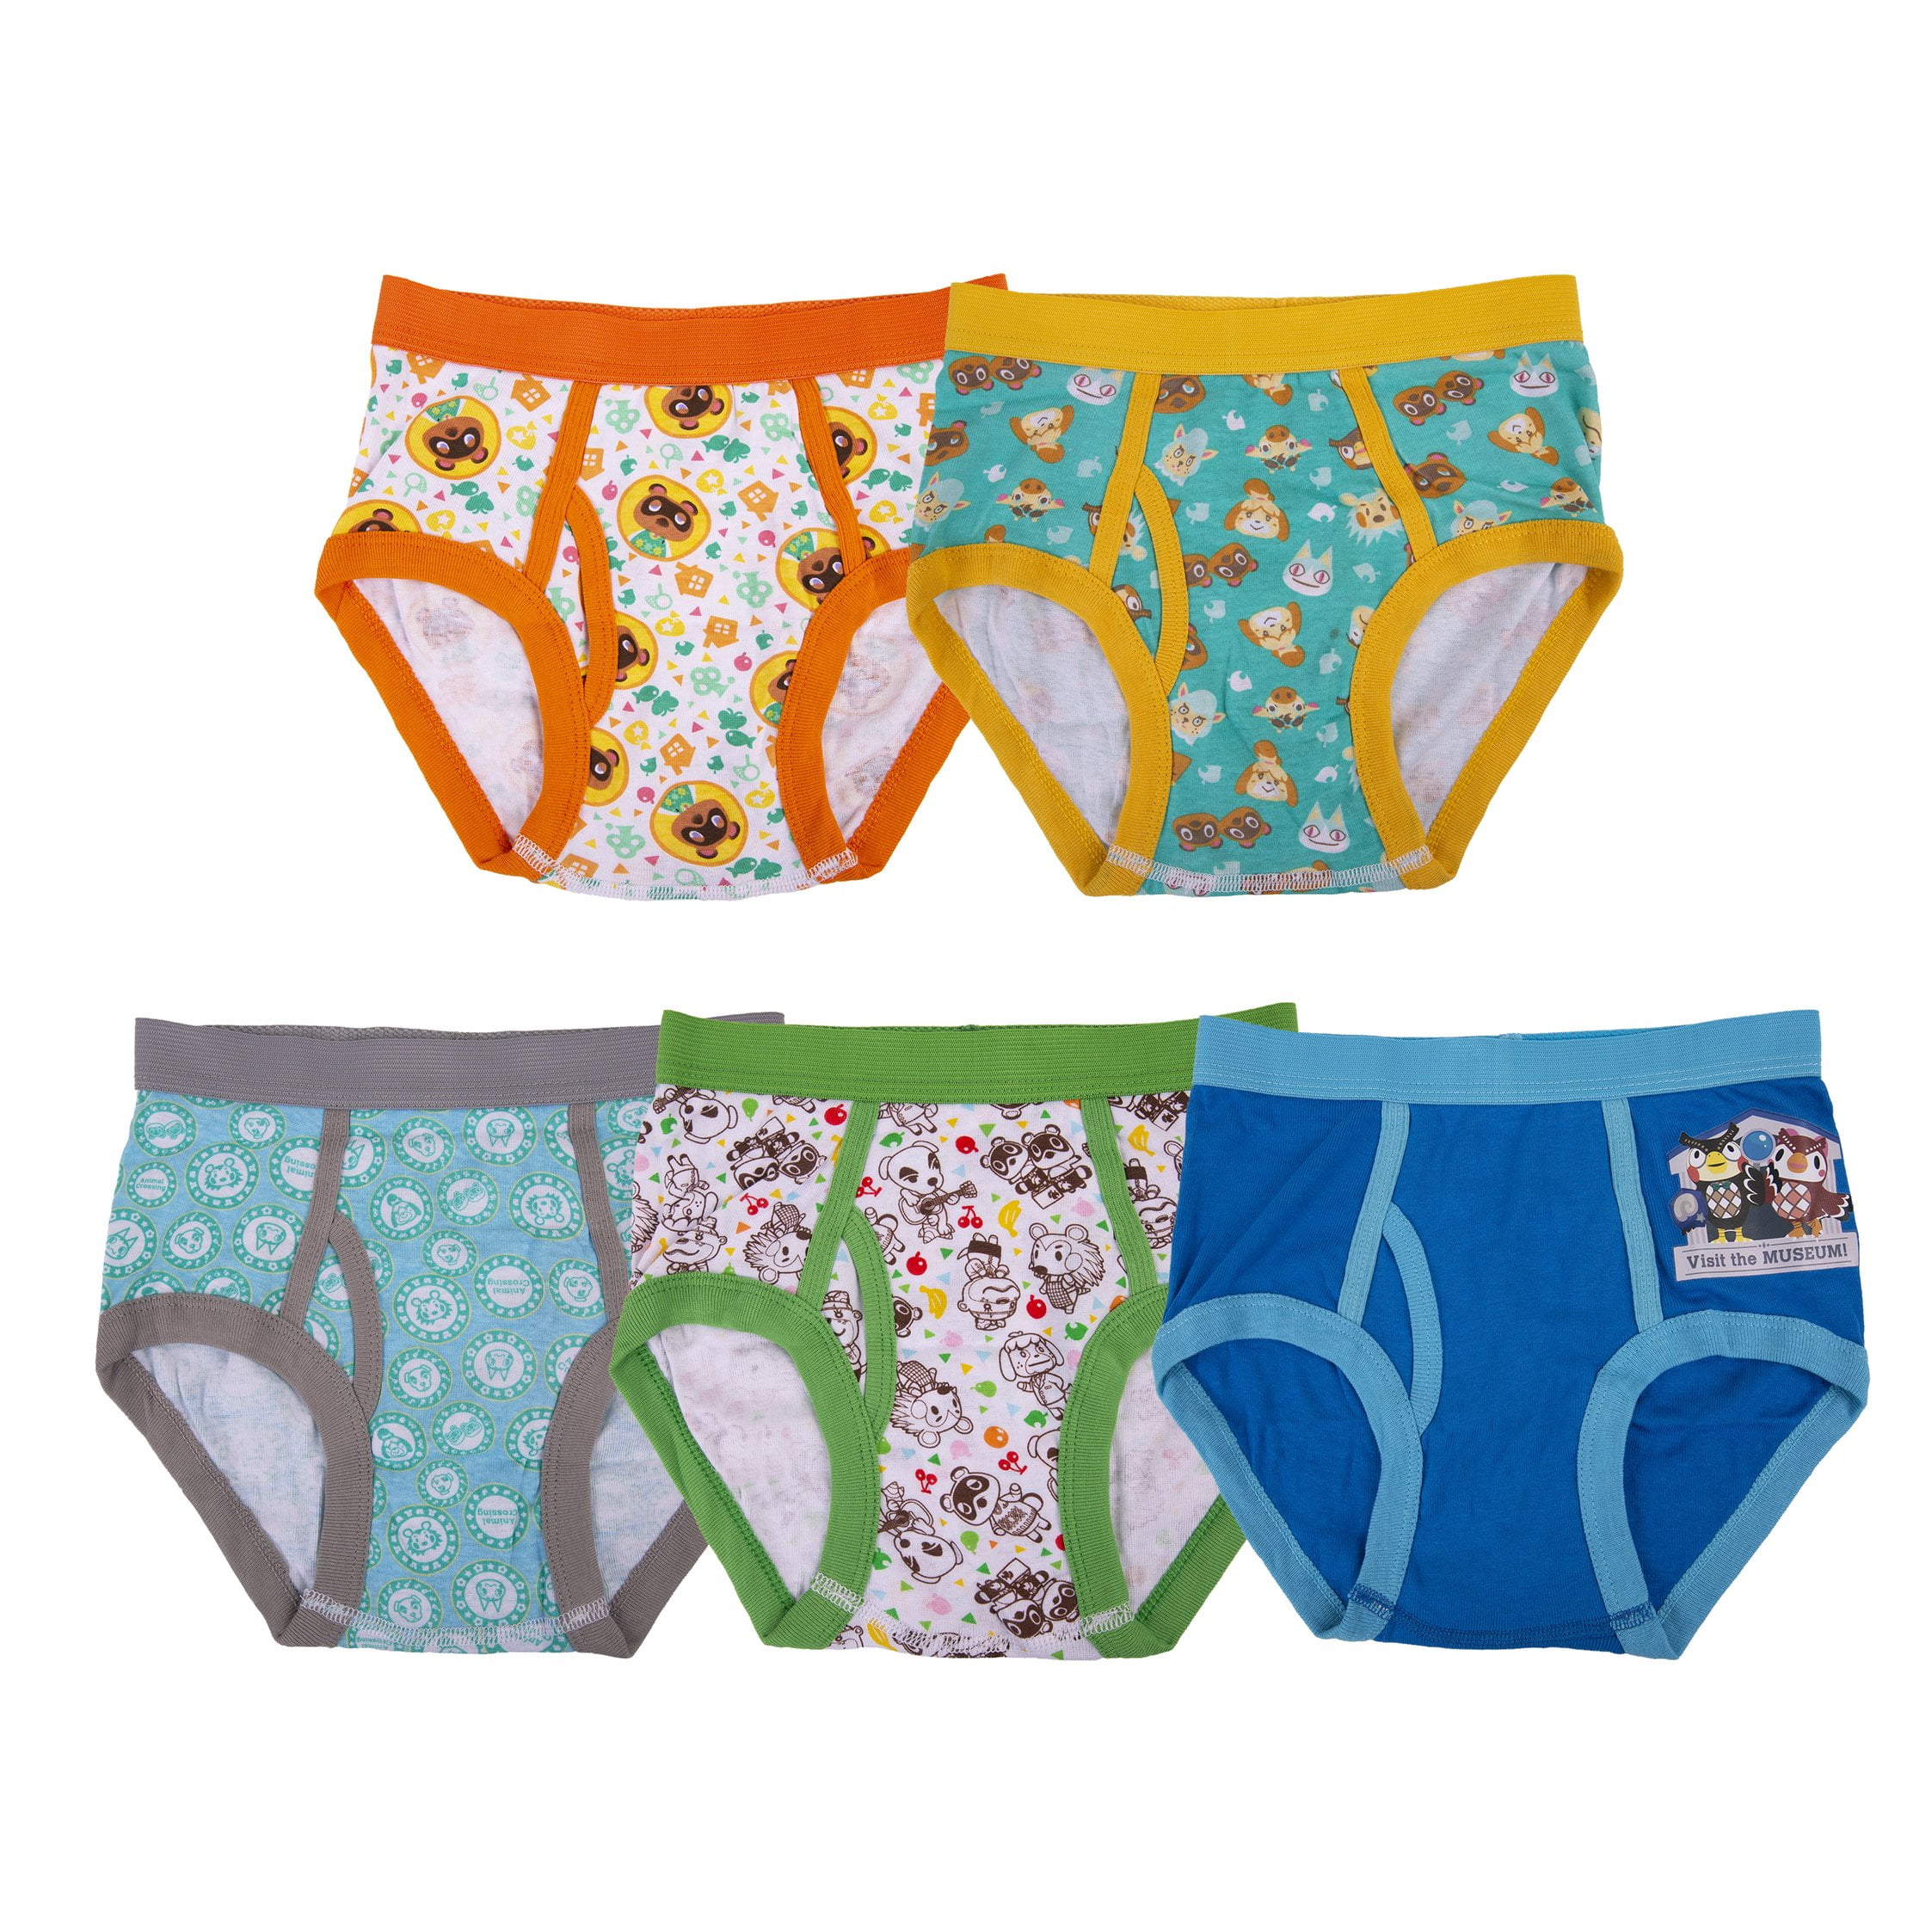  Sonic The Hedgehog Girls' 7-Pack 100% Cotton Underwear  Available in Sizes 4, 6, and 8: Clothing, Shoes & Jewelry